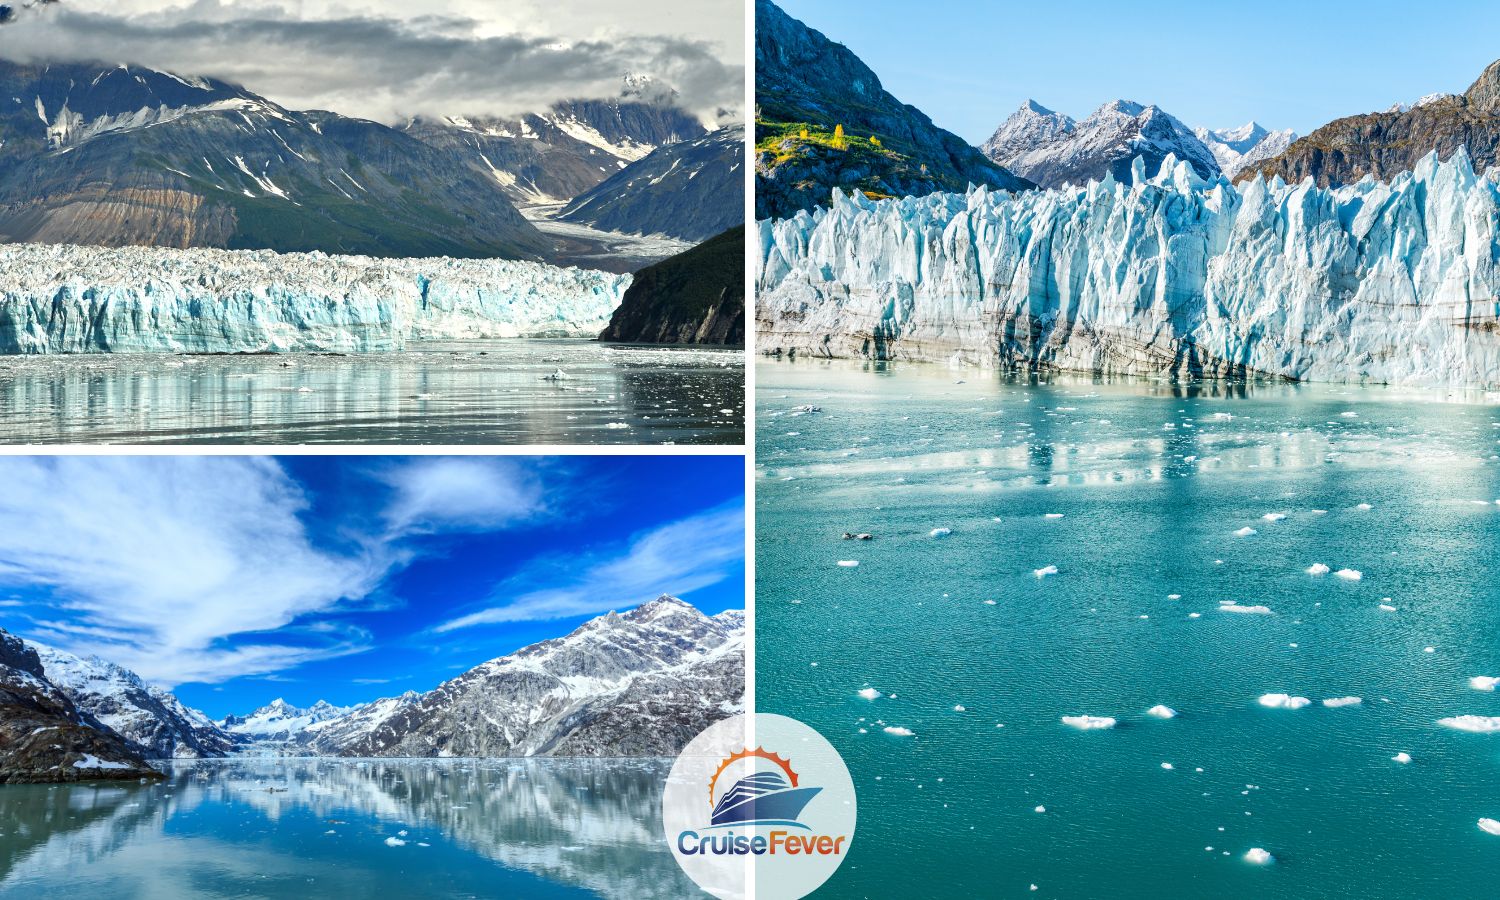 glaciers in Alaska and choosing the right itinerary